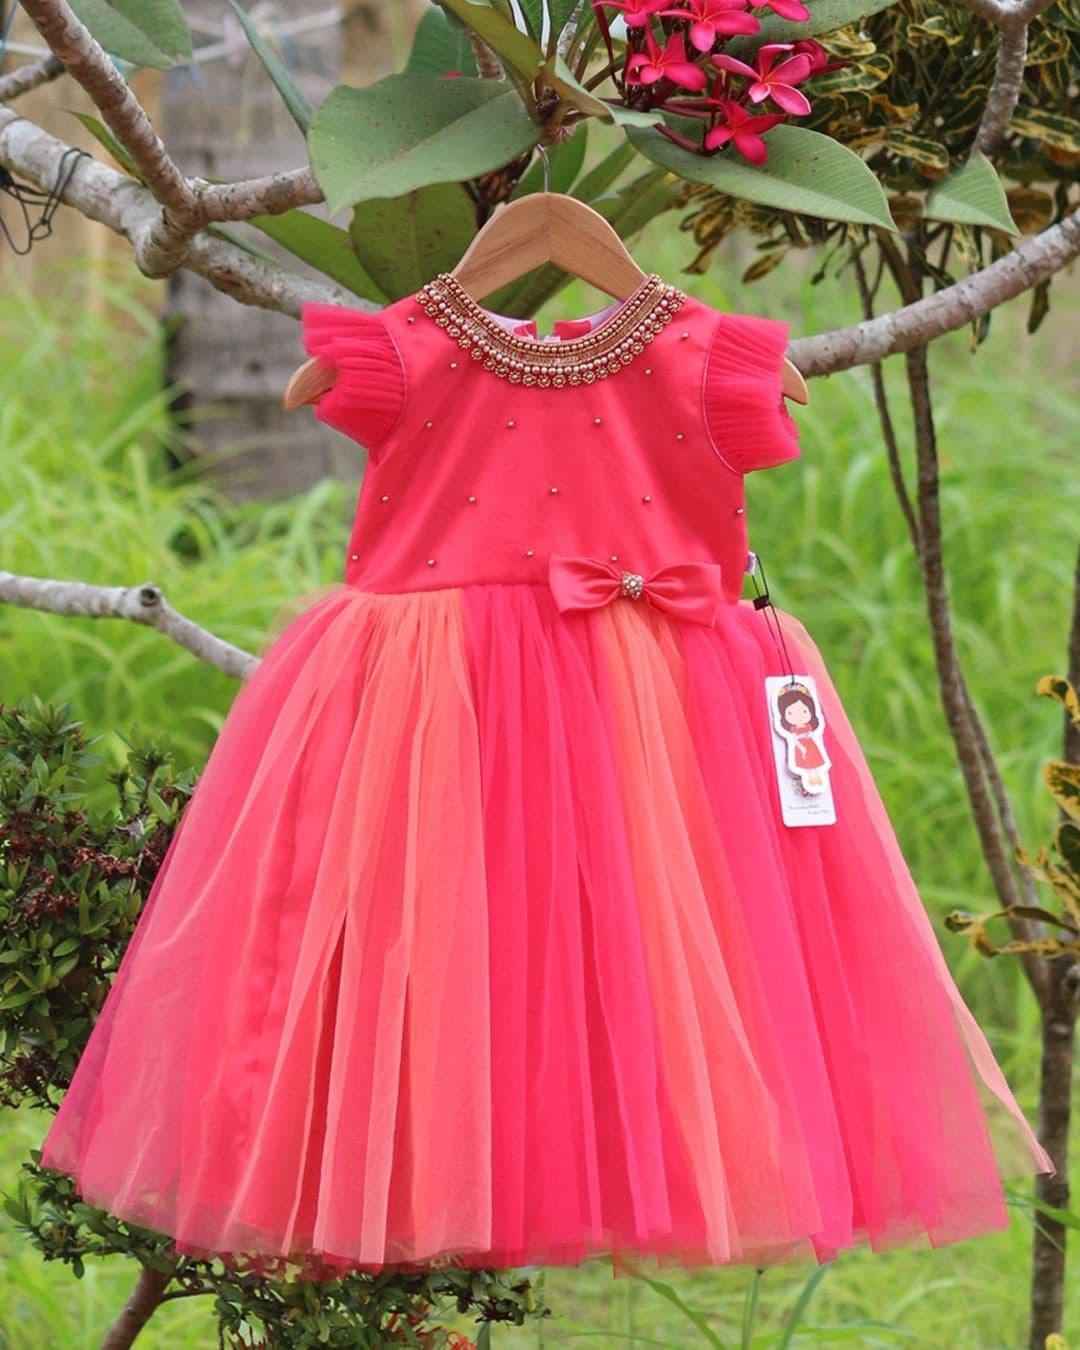 Pink & Peach Handworked Bow Frock
Material: Peach and Pink nylon mono net with inner portion is covered with premium ultra satin and white cotton lining.
Colour: Peach &amp; Pink combo | Sleeve Type